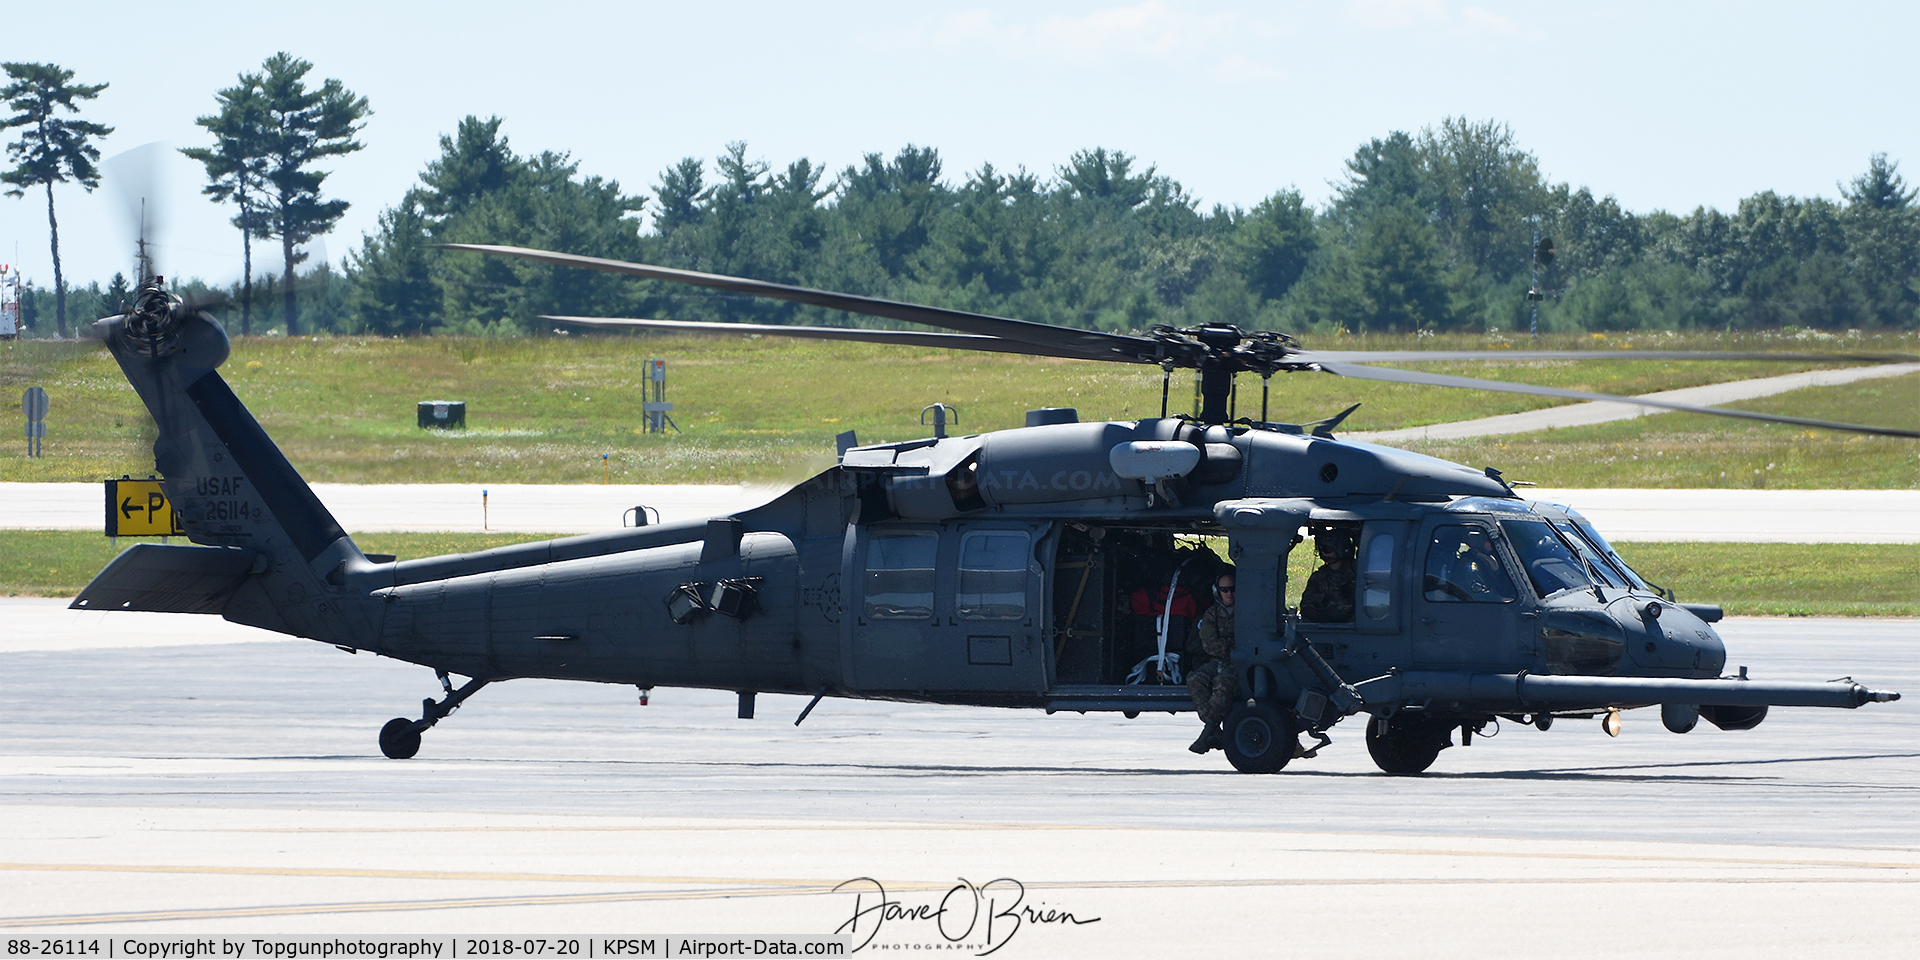 88-26114, 1986 Sikorsky HH-60G Pave Hawk C/N 70.1311, JOLLY13 102nd RQS